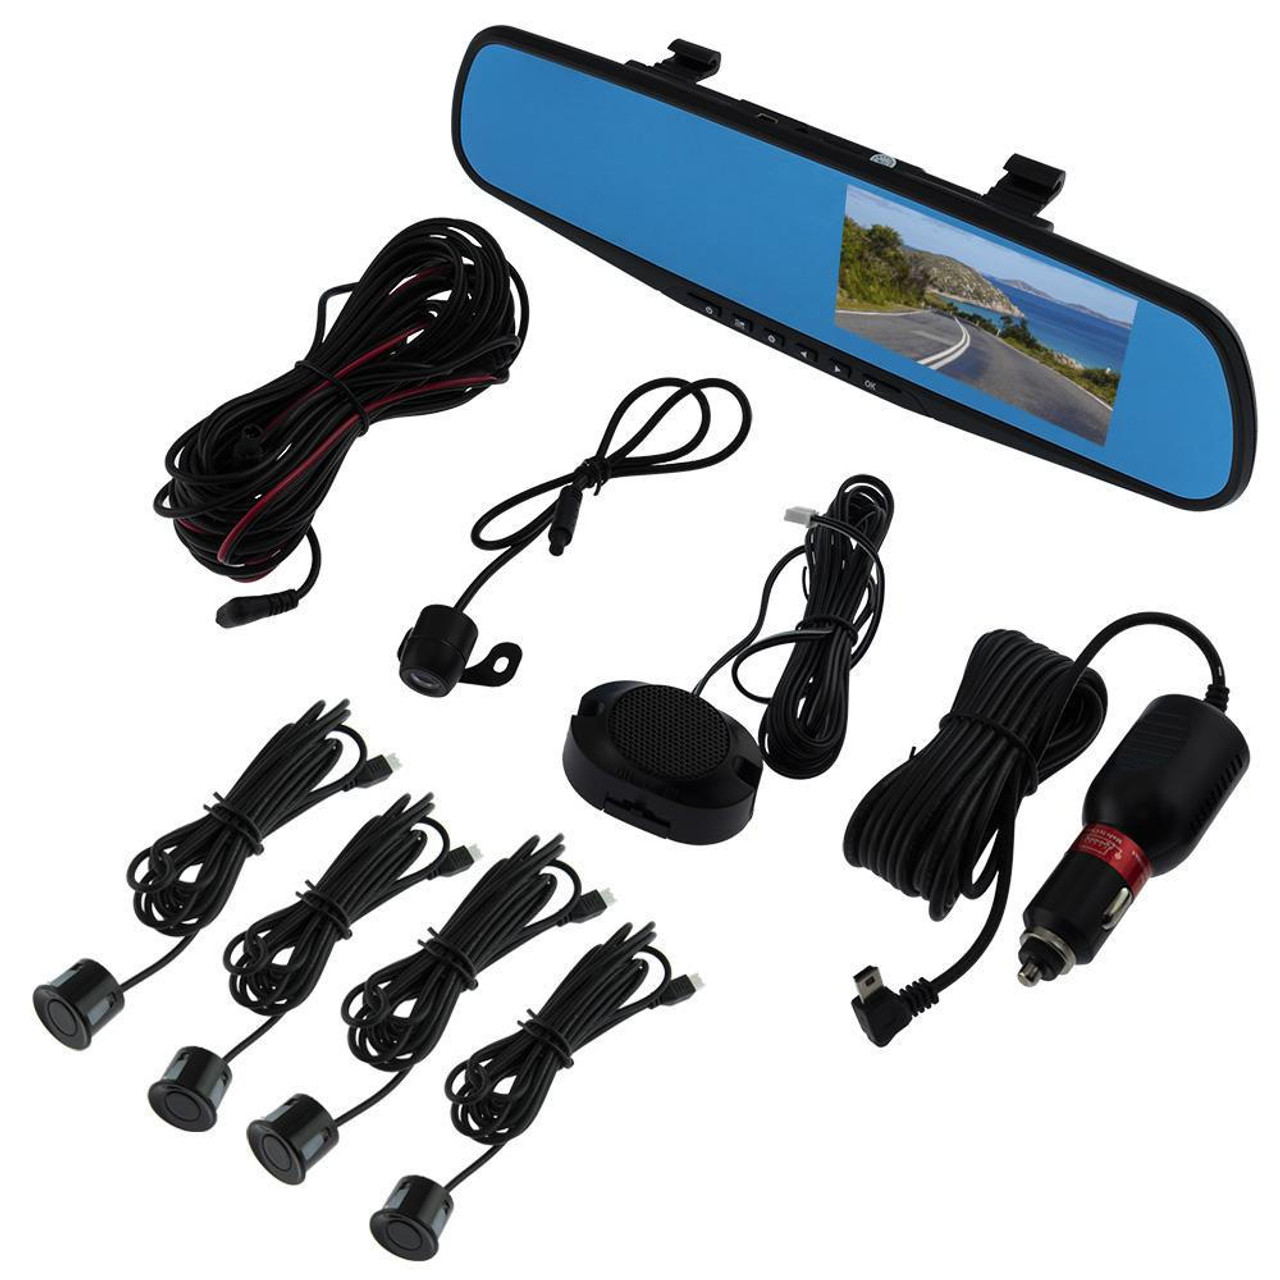 https://cdn11.bigcommerce.com/s-209k8v1/images/stencil/1280x1280/products/19138/38399/ds18-audio-rearview-mirror-with-4.3-hd-lcd-display-and-built-in-1080p-dash-cam-recorder-and-license-plate-reverse-camera-and-back-up-sensors__51046.1658934861.jpg?c=2